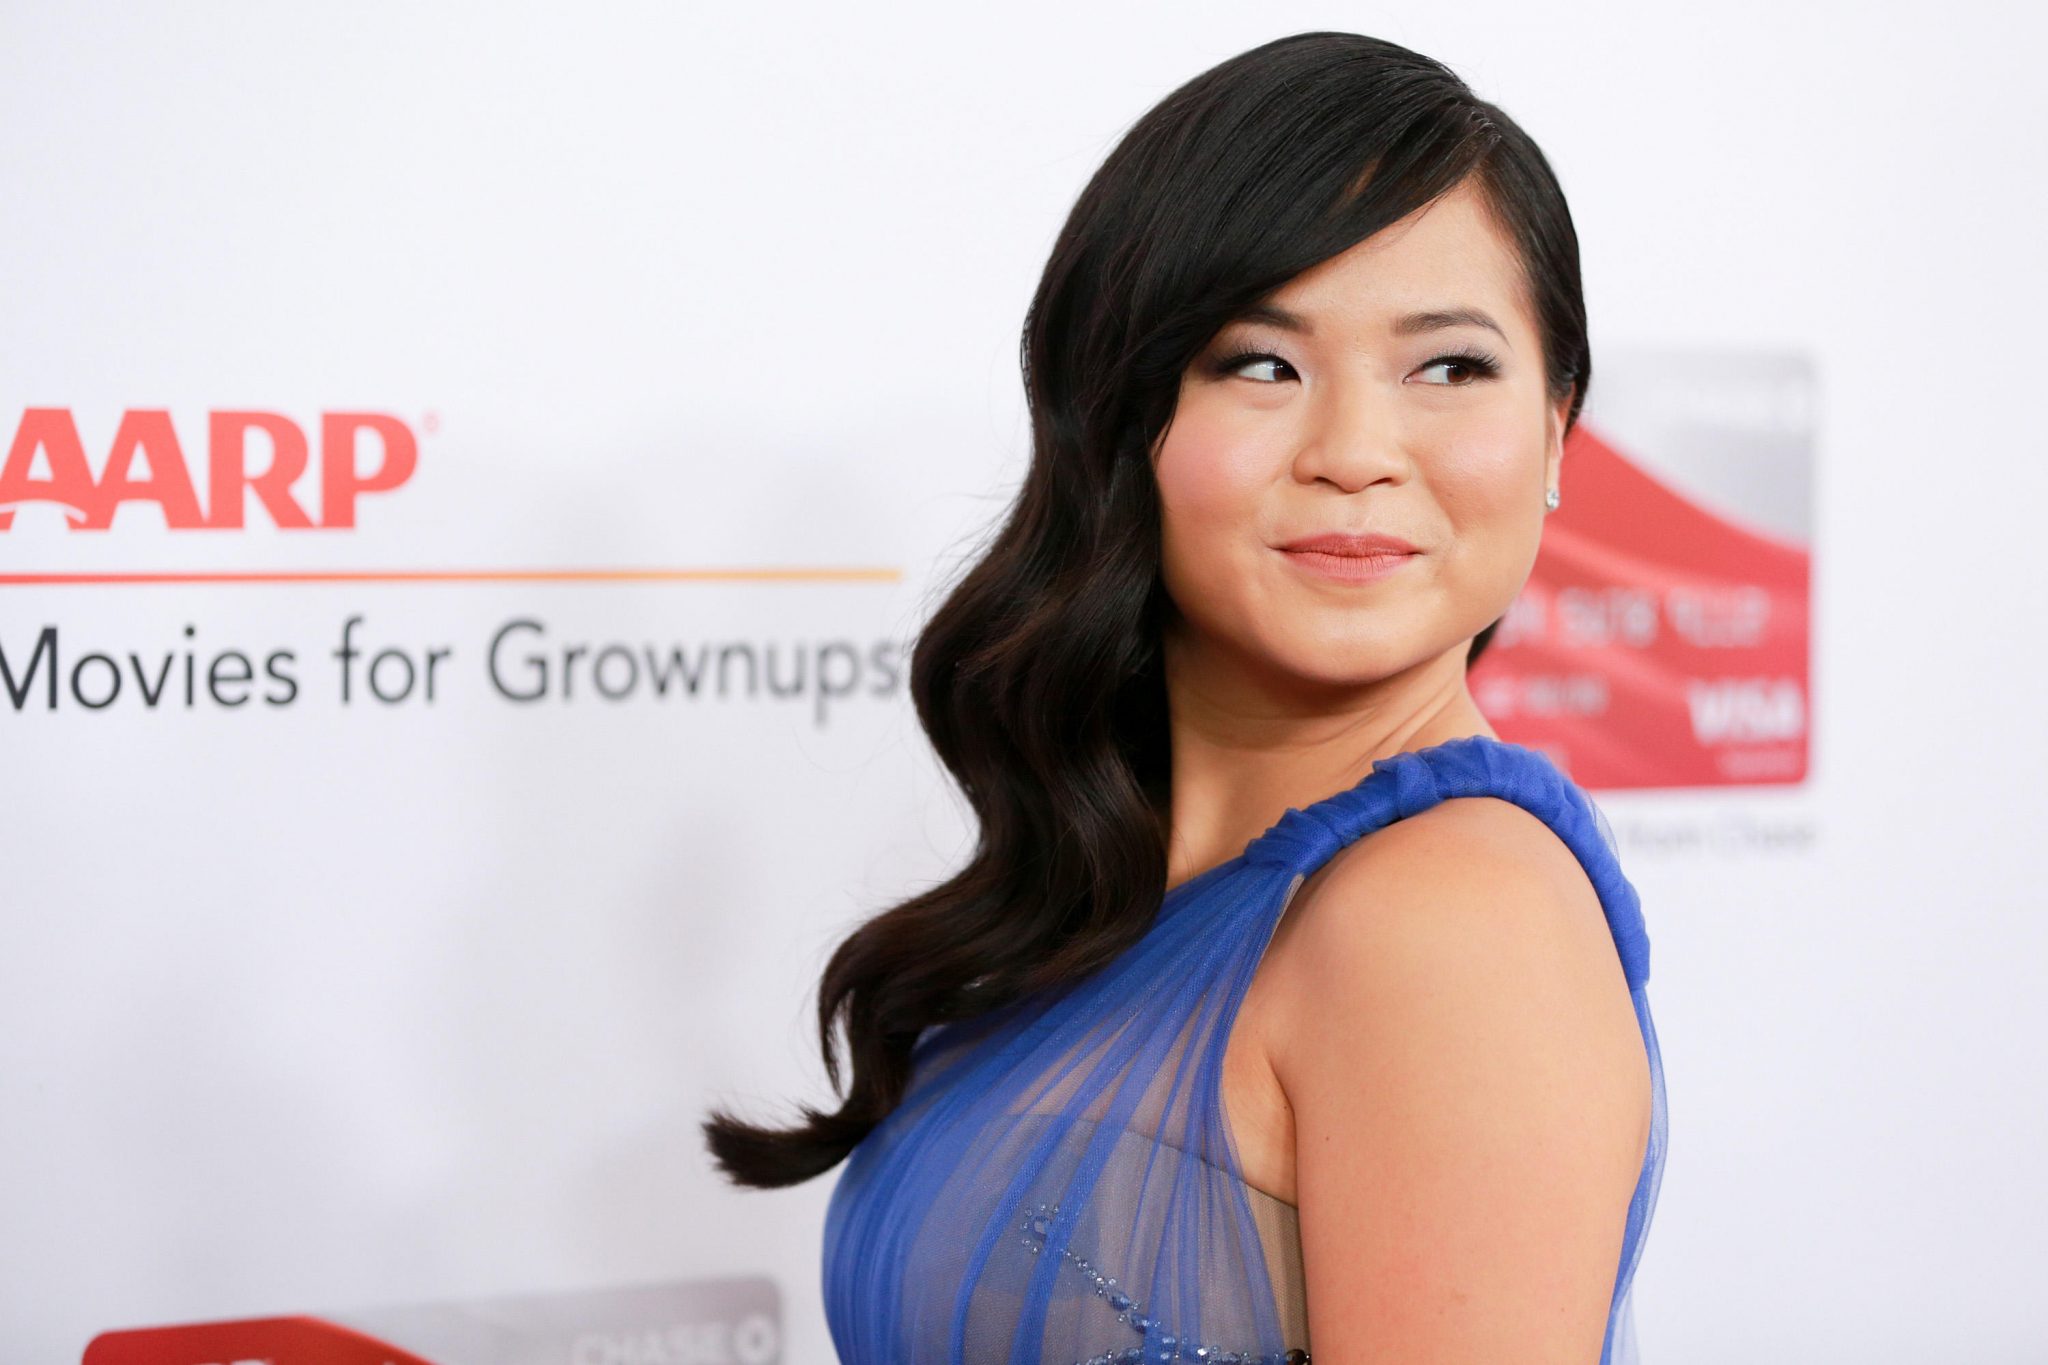 Kelly Marie Tran Cast as Lead in Disney Film 'Raya and the